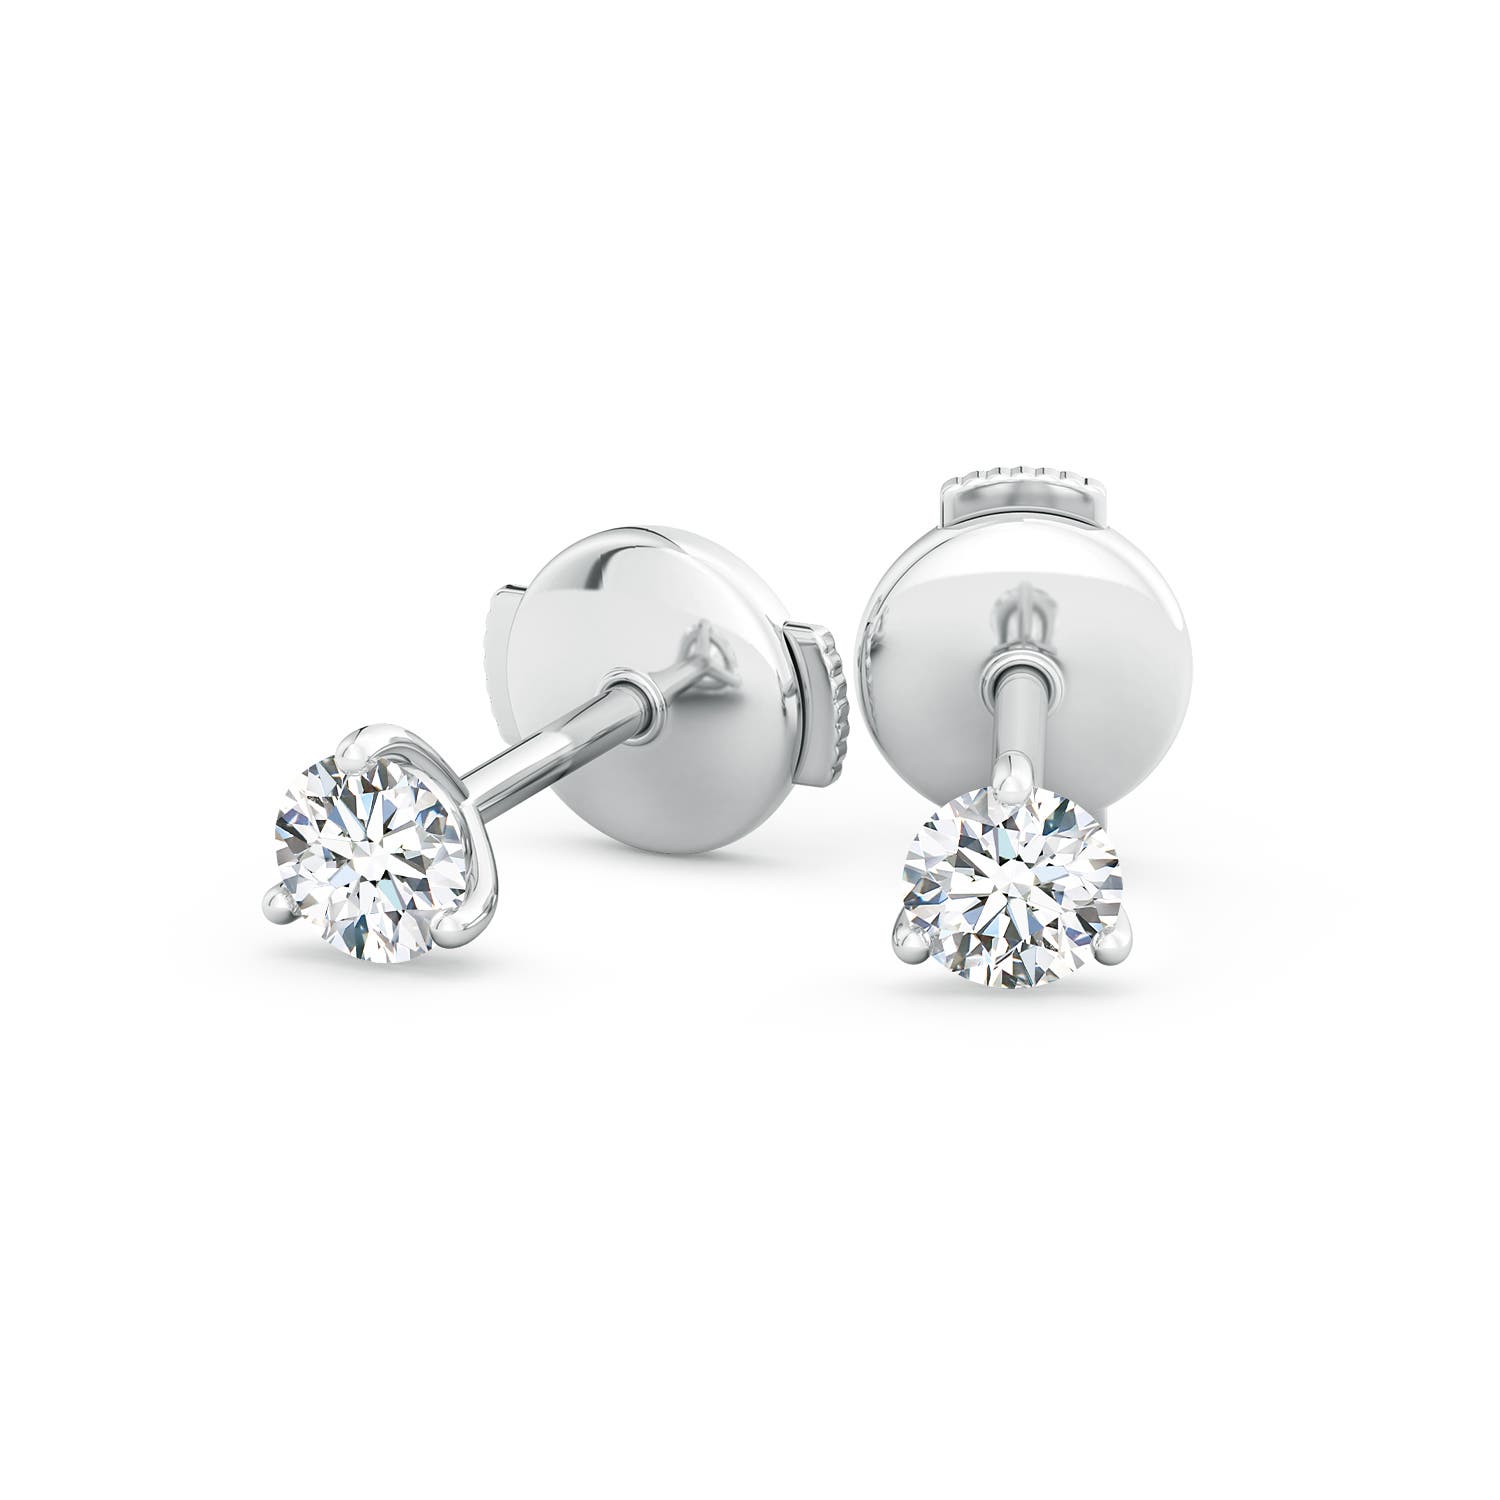 French Cut Diamond Studs Earrings | Ouros Jewels